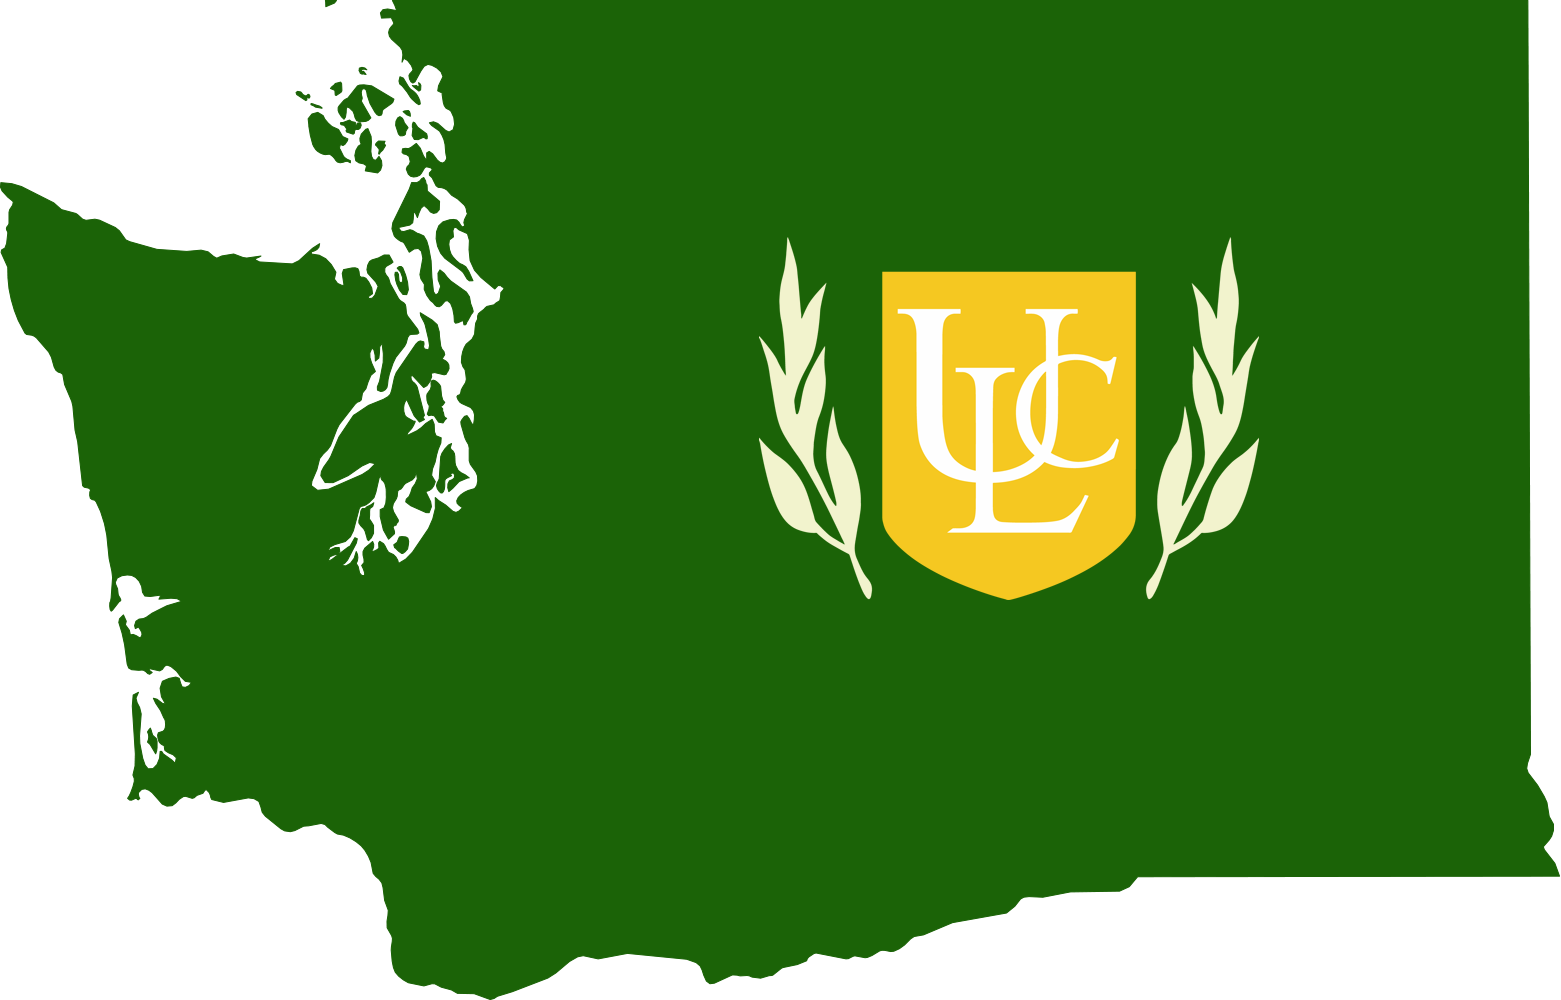 An outline of WA with the ULC logo